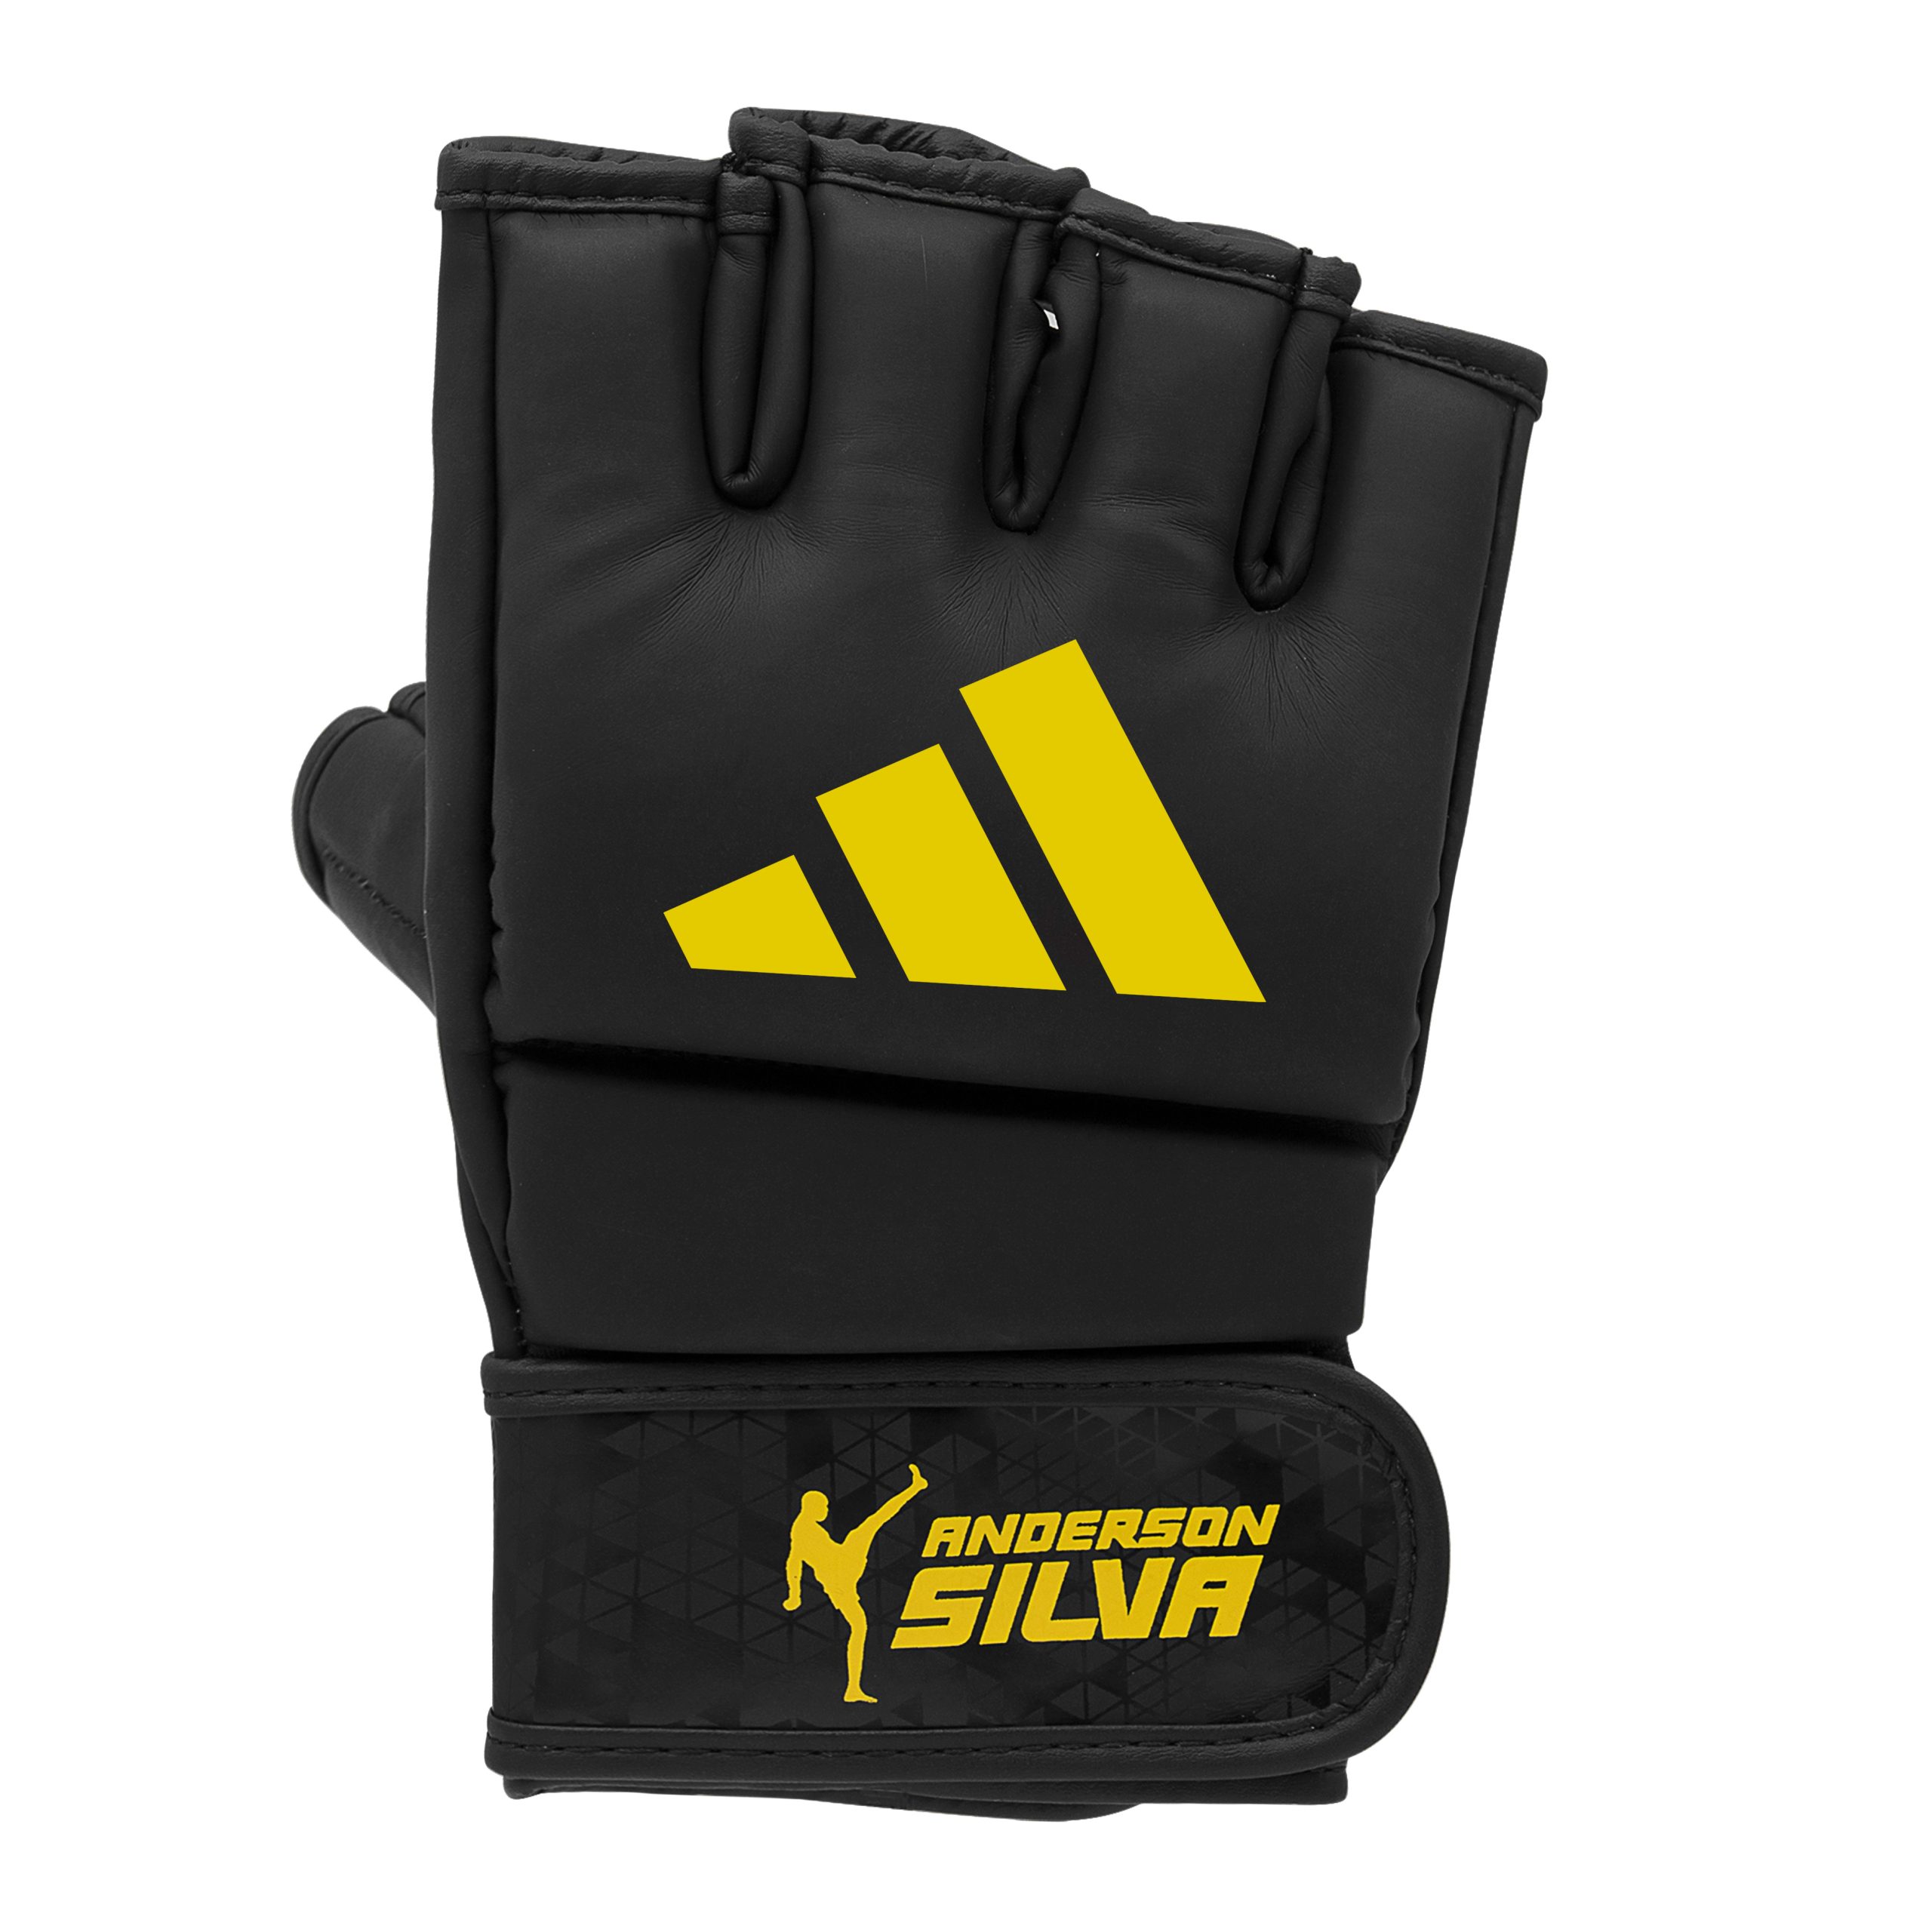 Adidas x Anderson Silva Everyday Use Training and Grappling Gloves